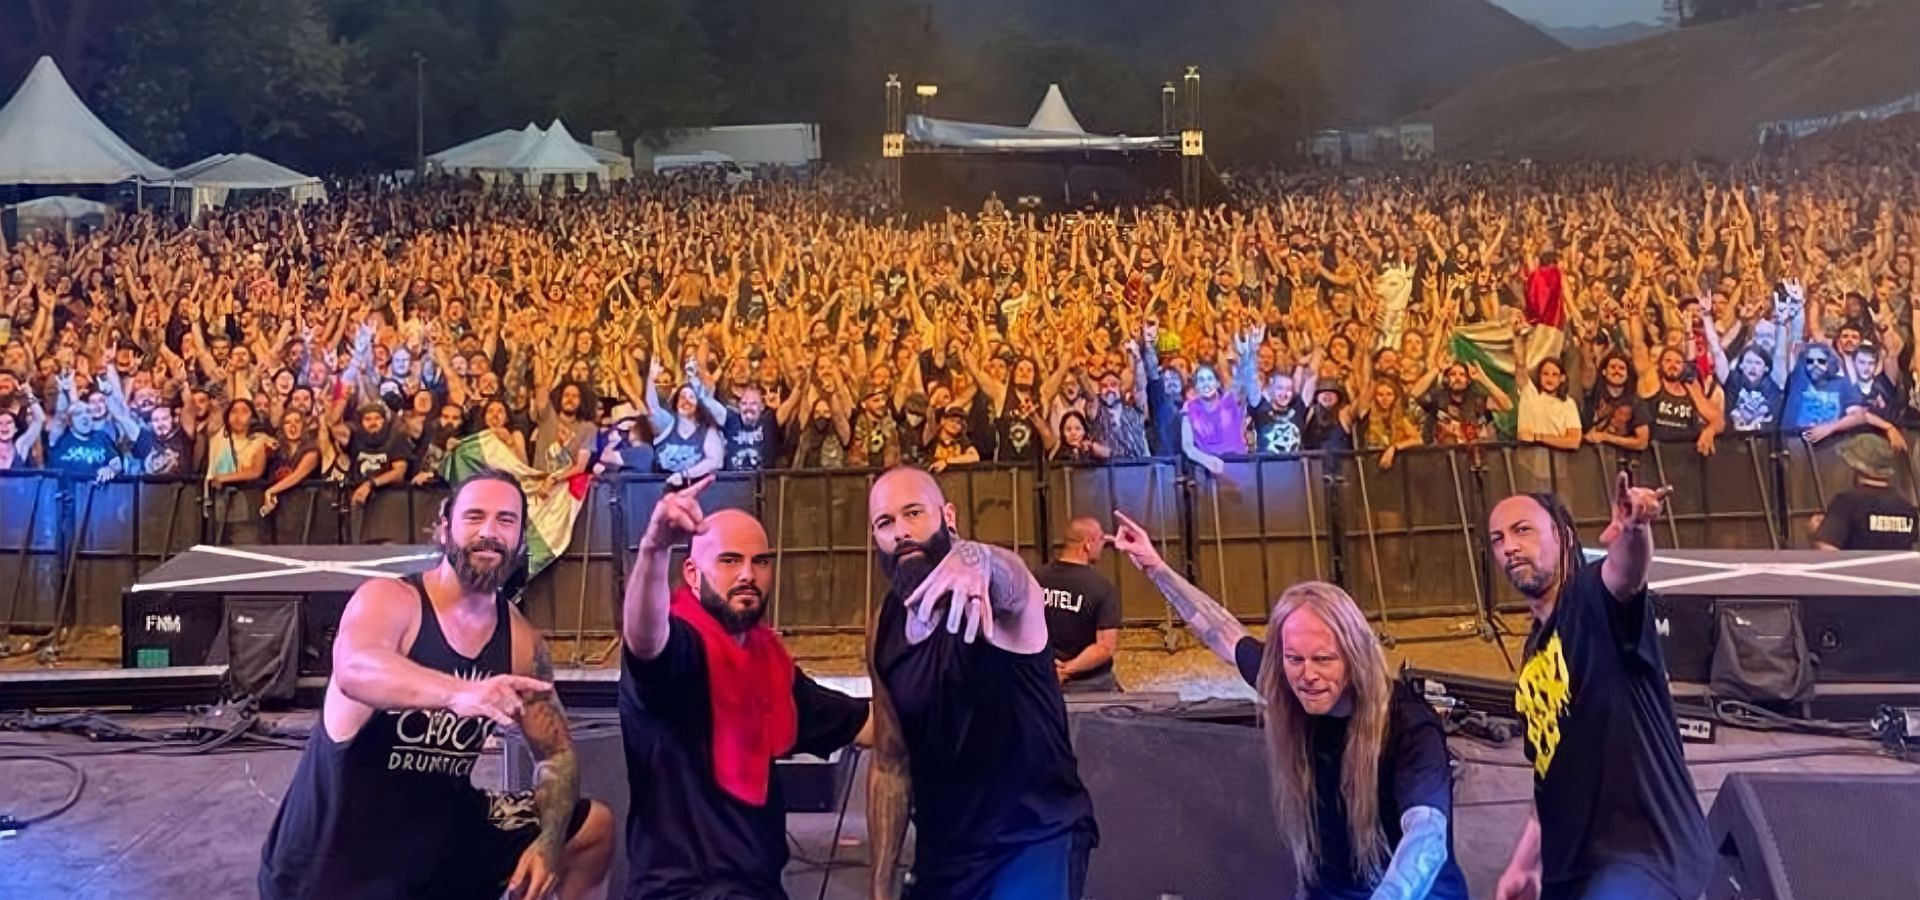 Suffocation European Tour 2023 Tickets, dates, venues, and more